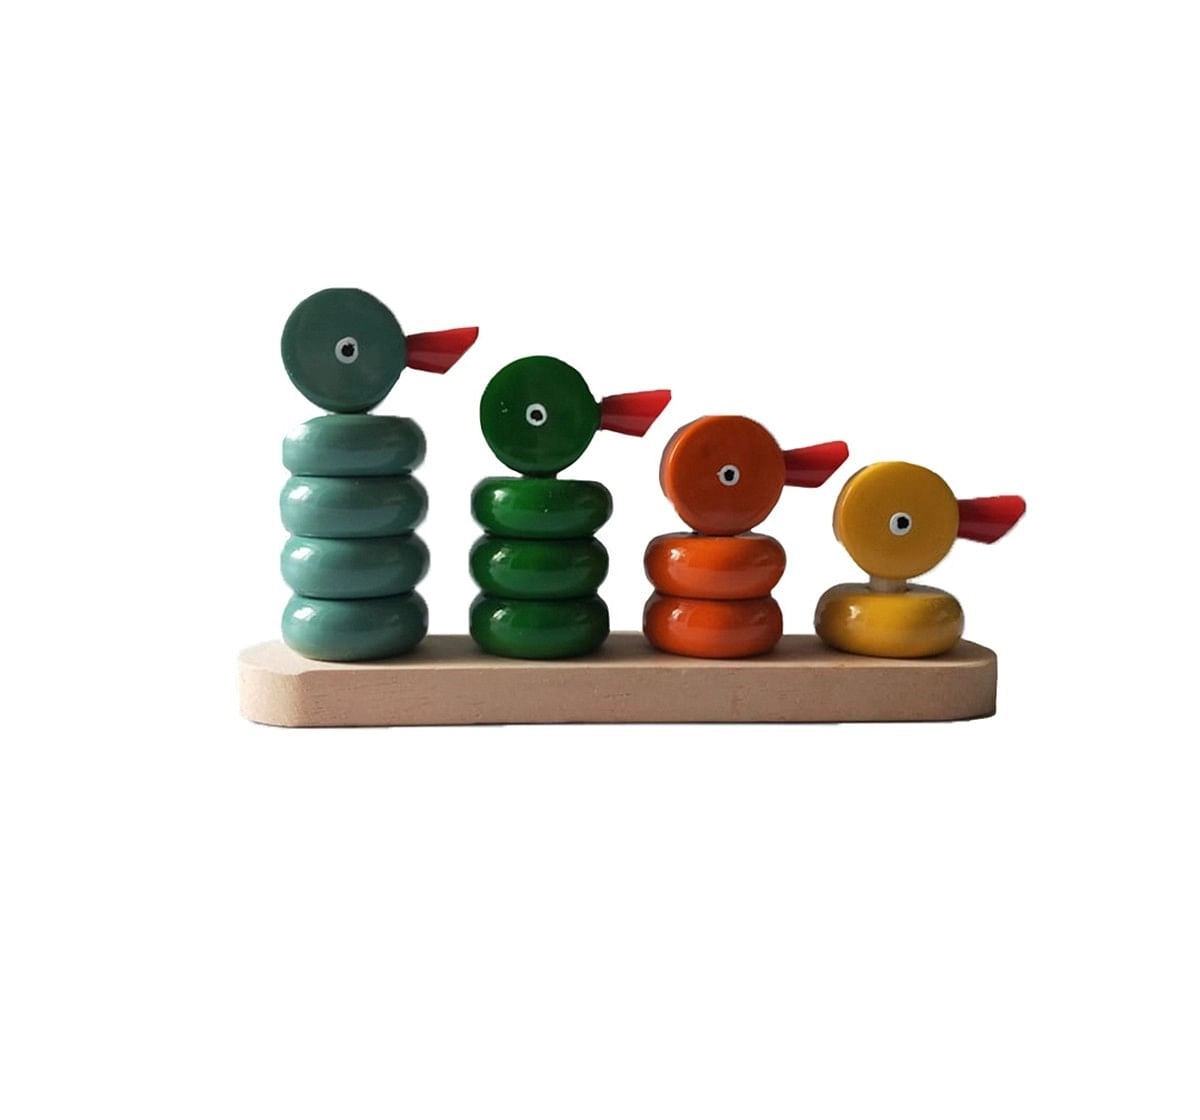 Nurture India Wooden Duck Counting Set 4 Wooden Toys for Kids age 12M+ 